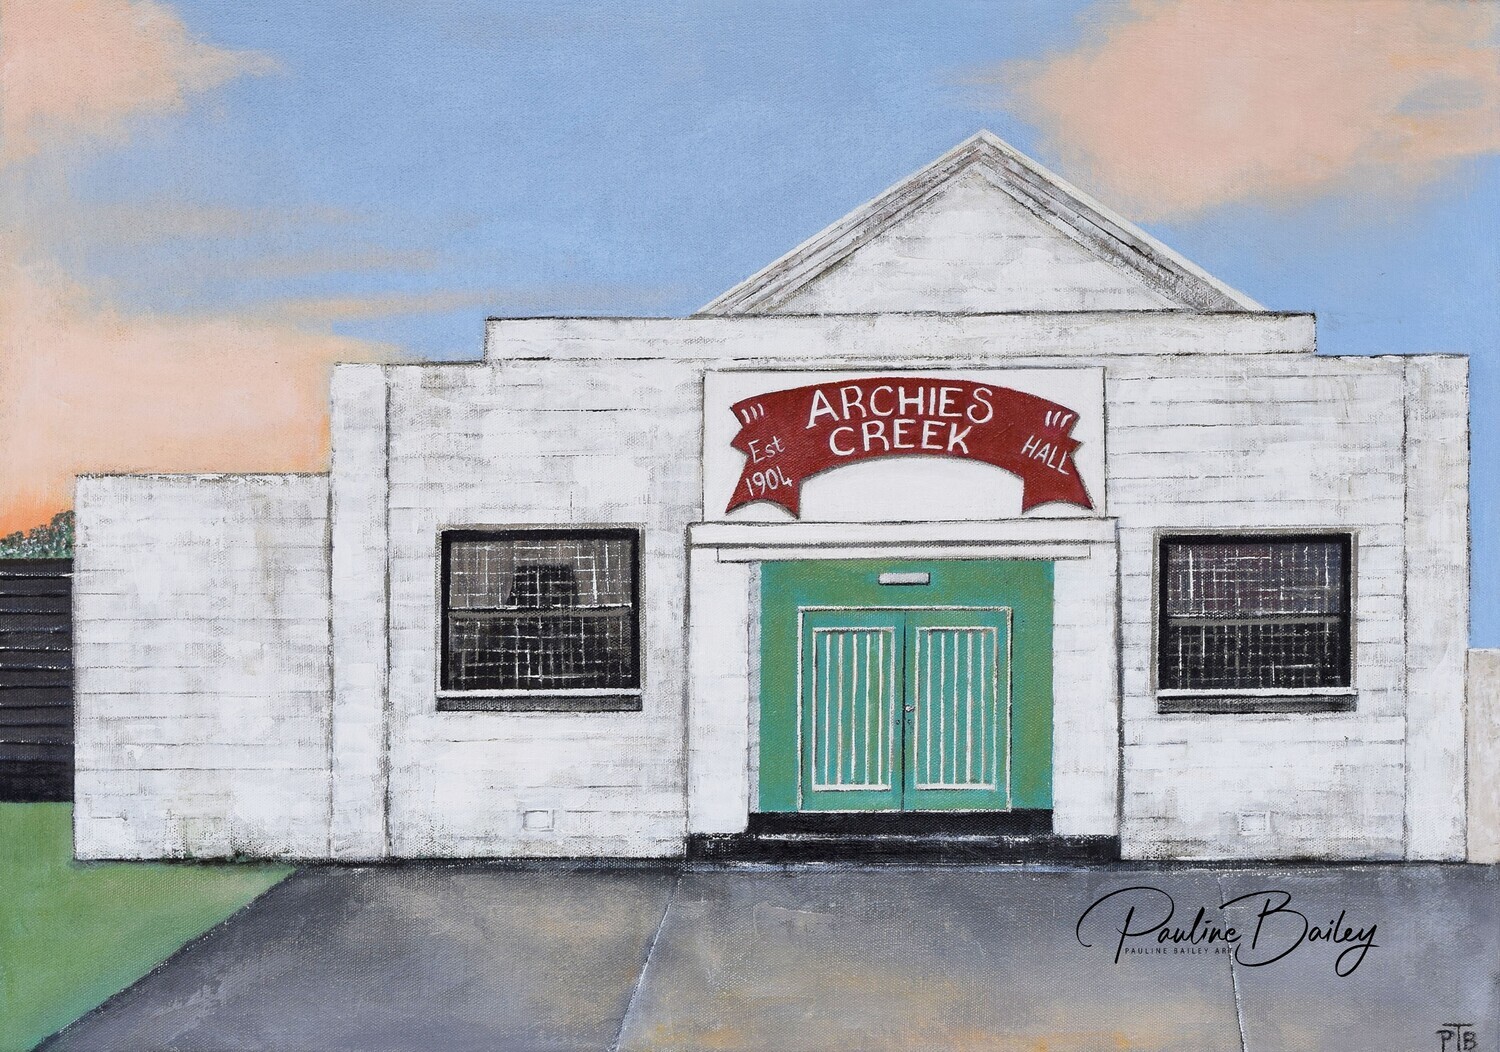 Original painting - Archies Creek Hall
*On display at the Criterion Hotel, Sale (payment and pickup options in description)